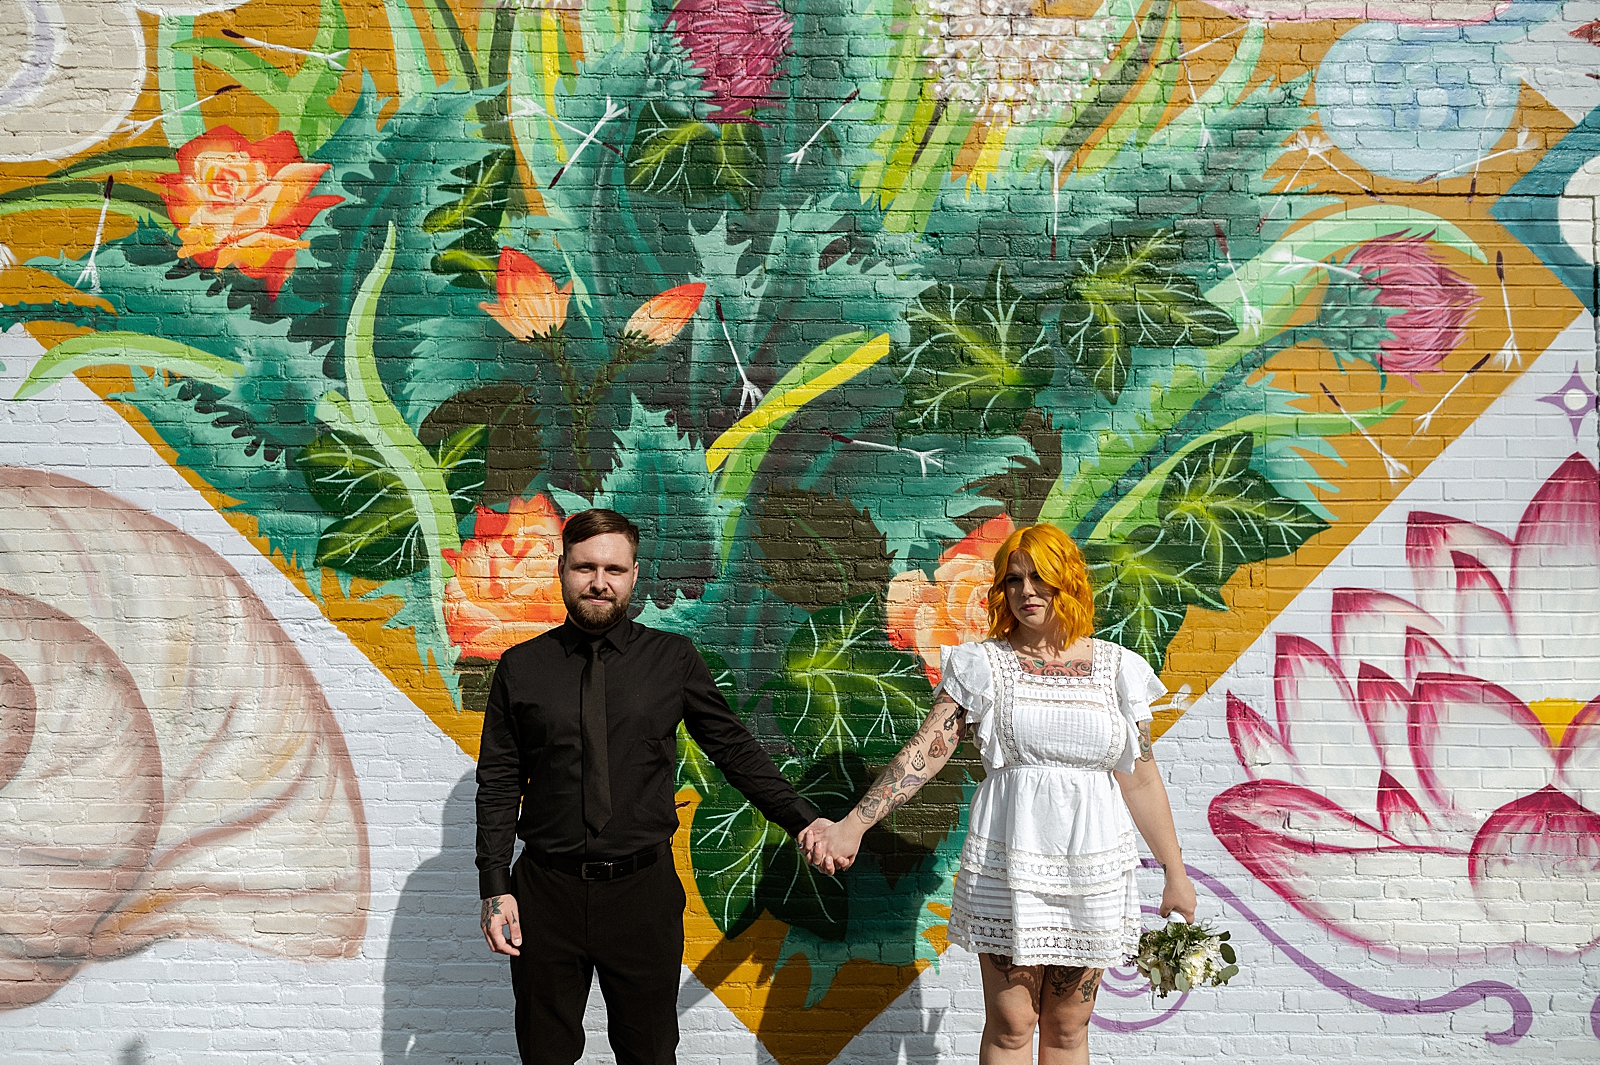 Bride and Groom extending their arms to hold hands in front of street art wall